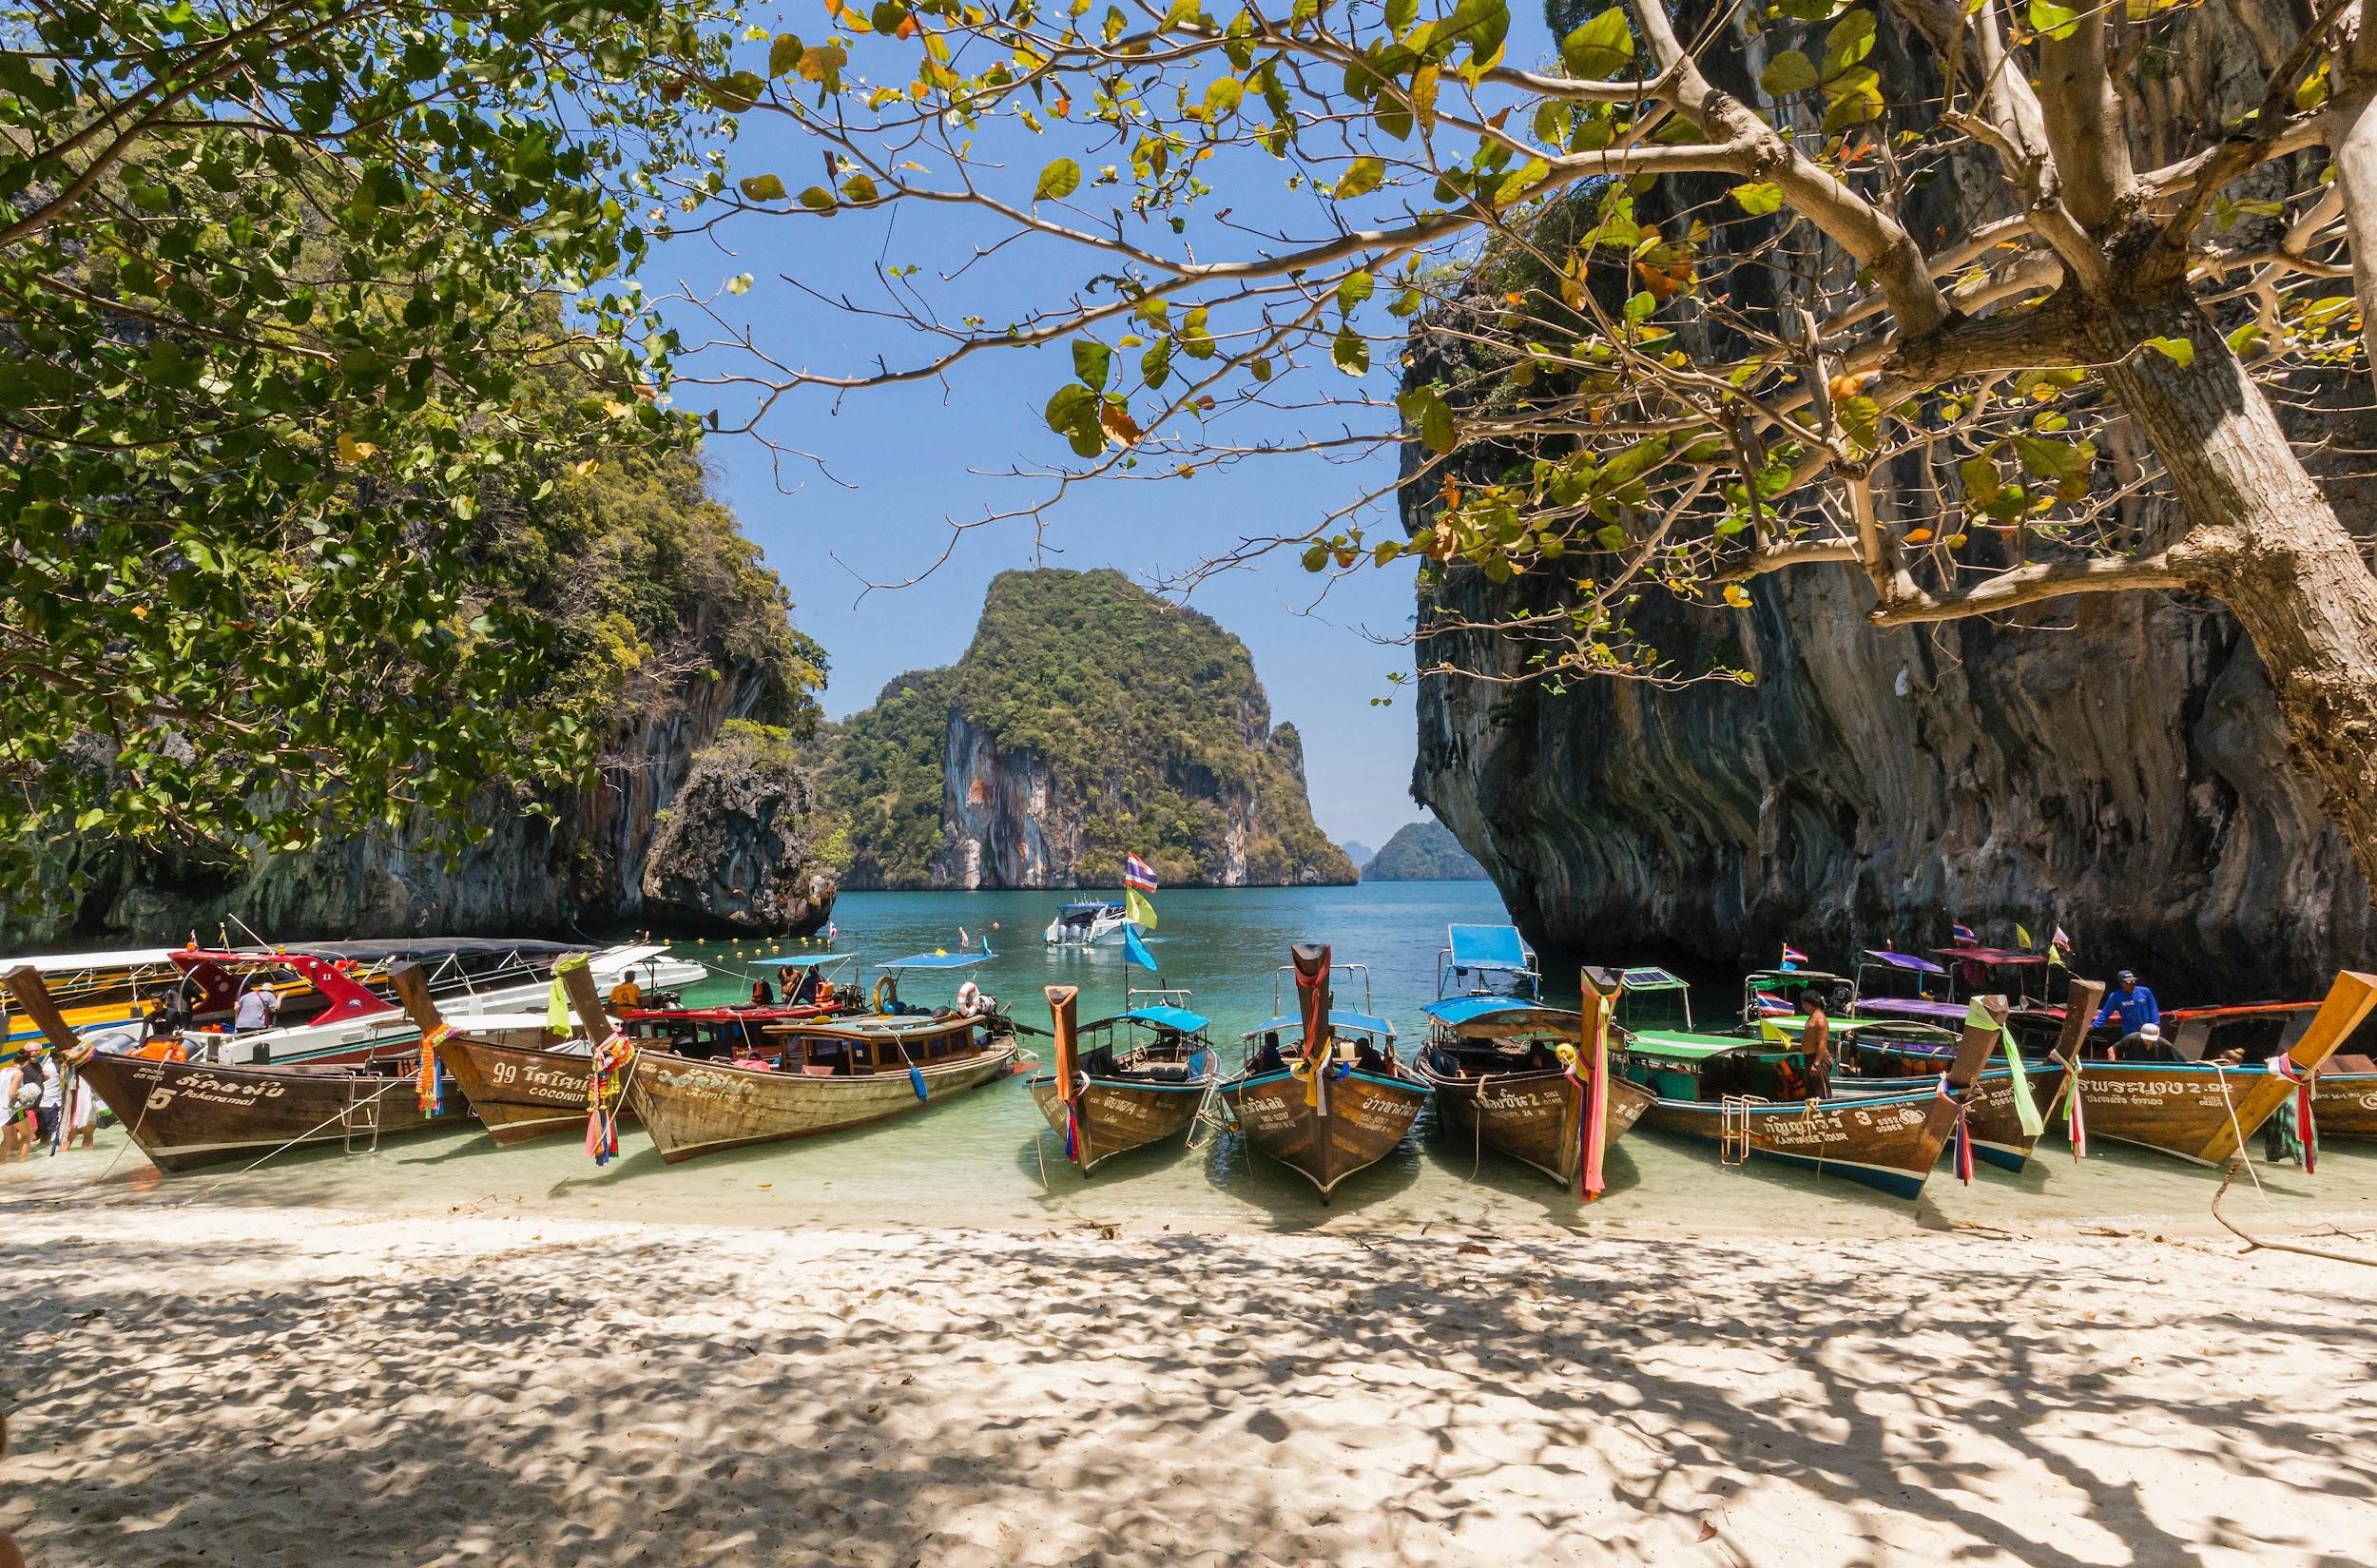 Image of boats on a beach in Thailand